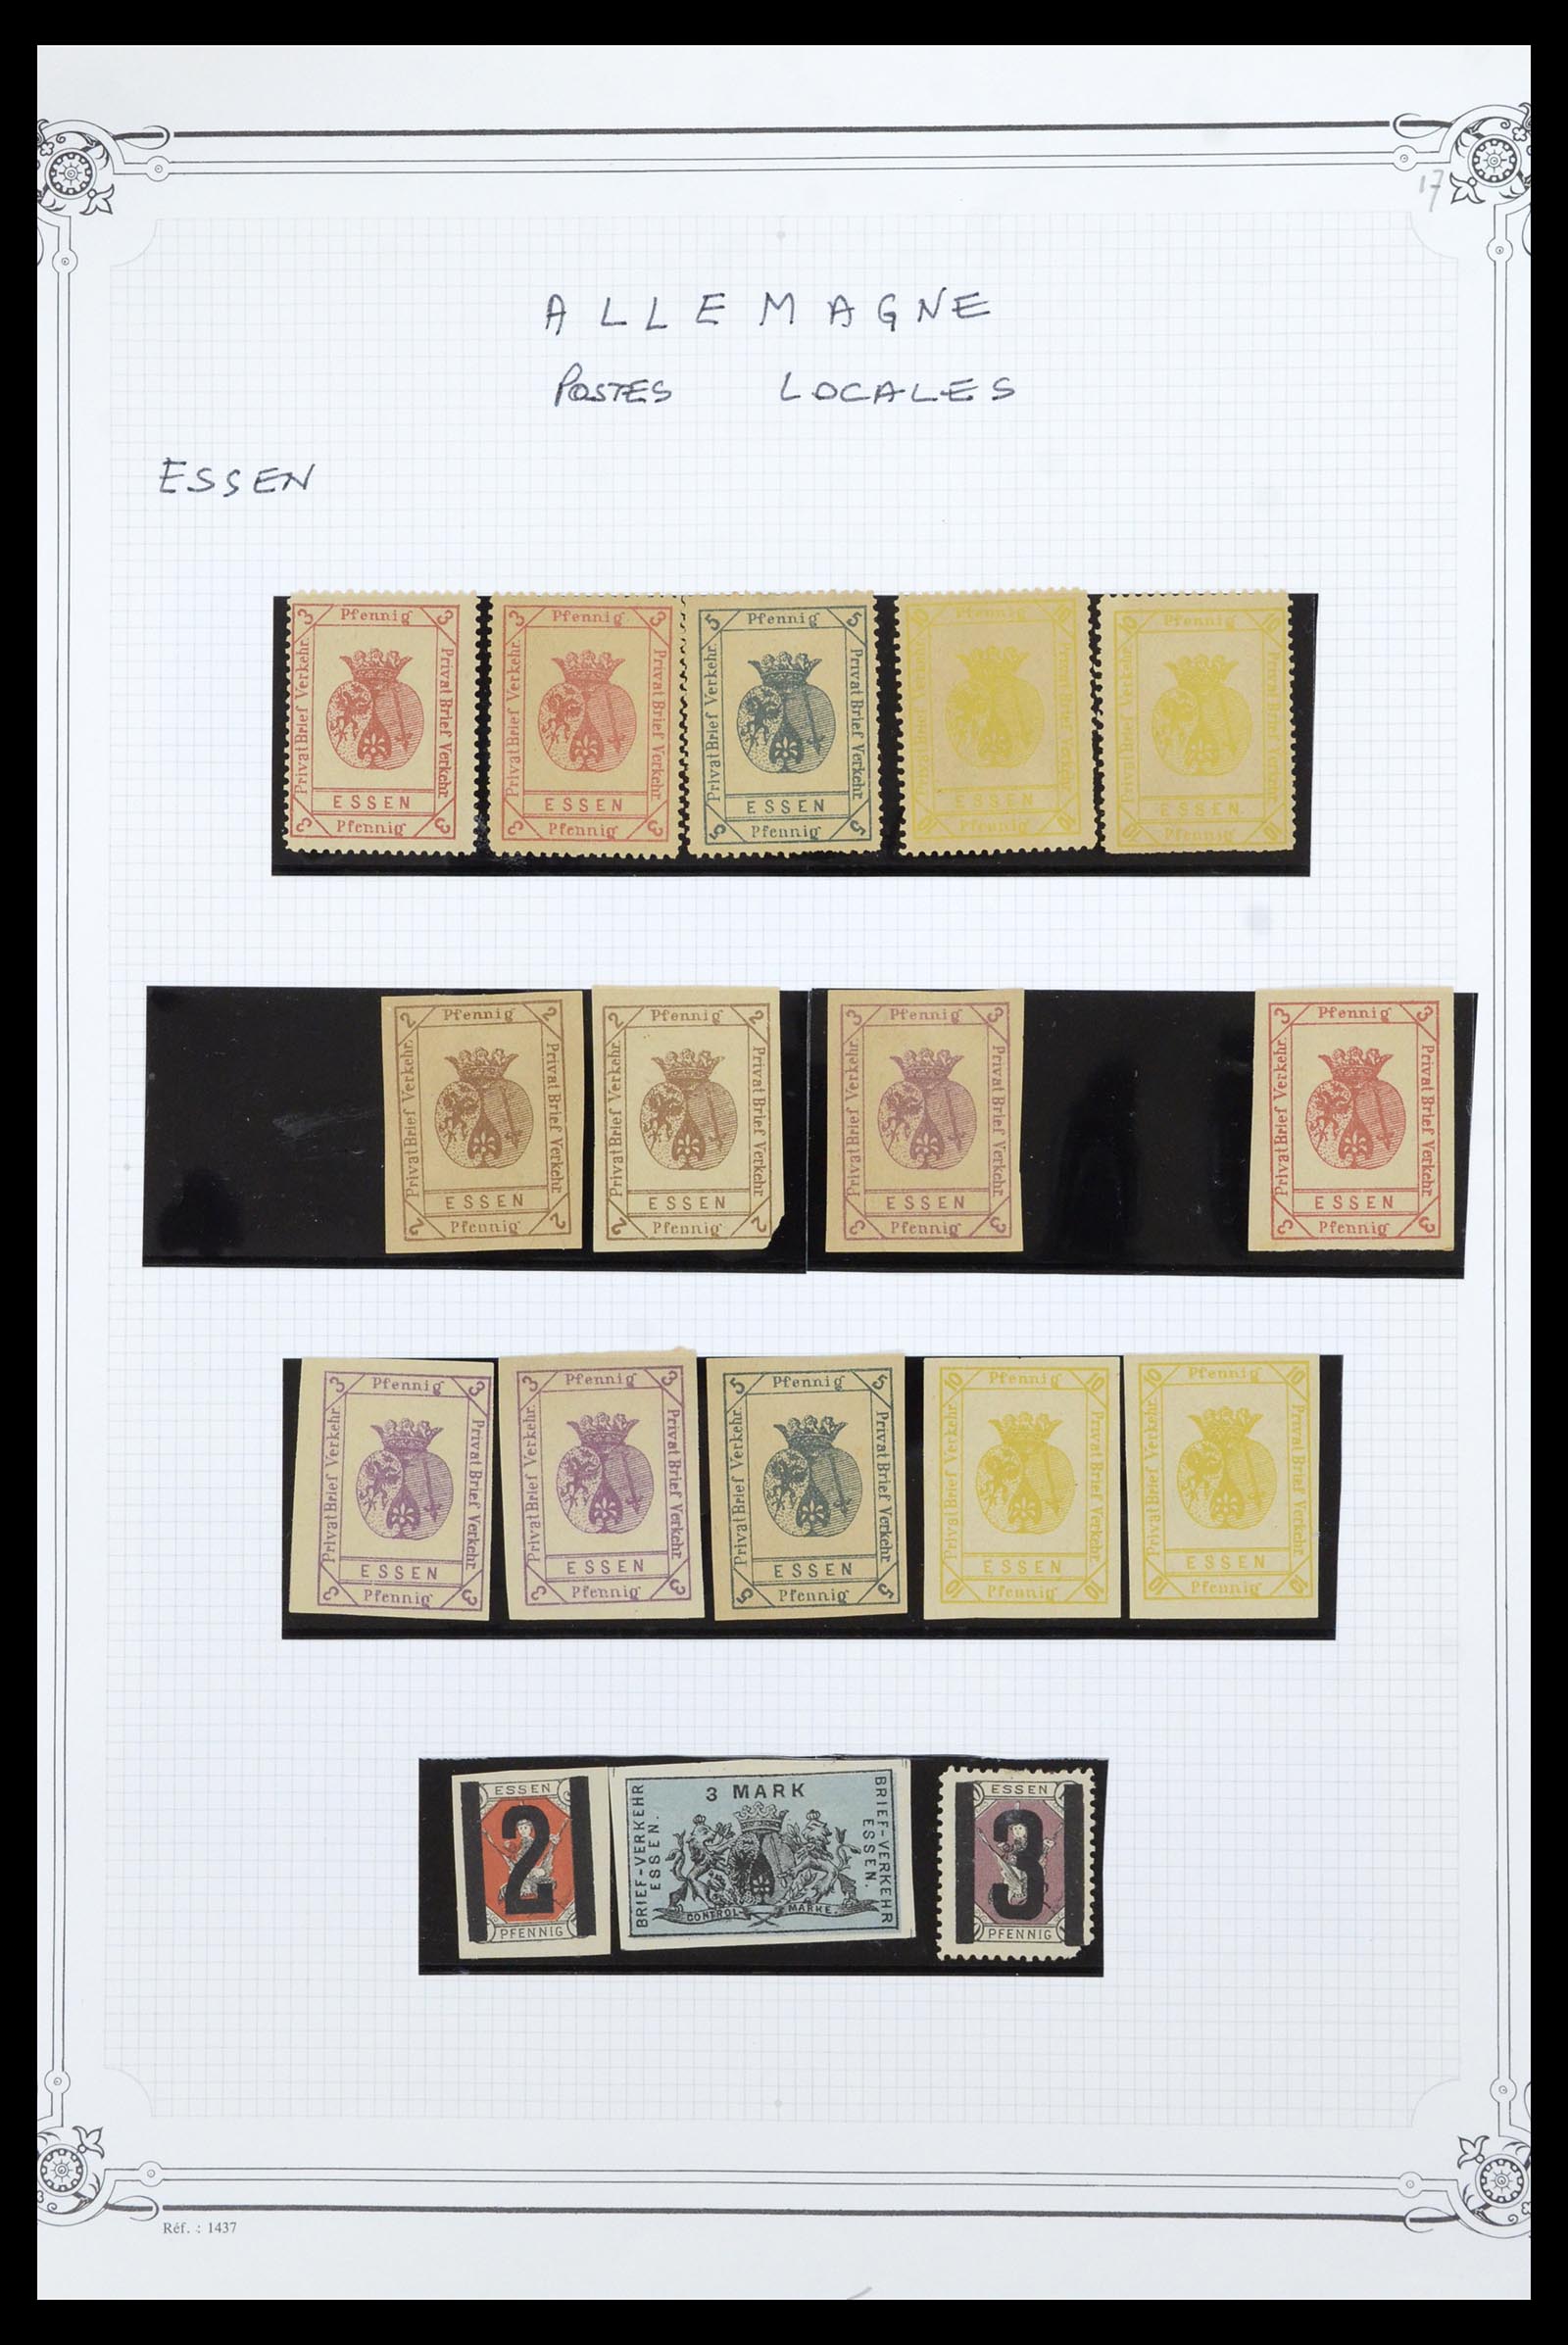 36972 016 - Stamp collection 36972 Germany local post 1880-1900.